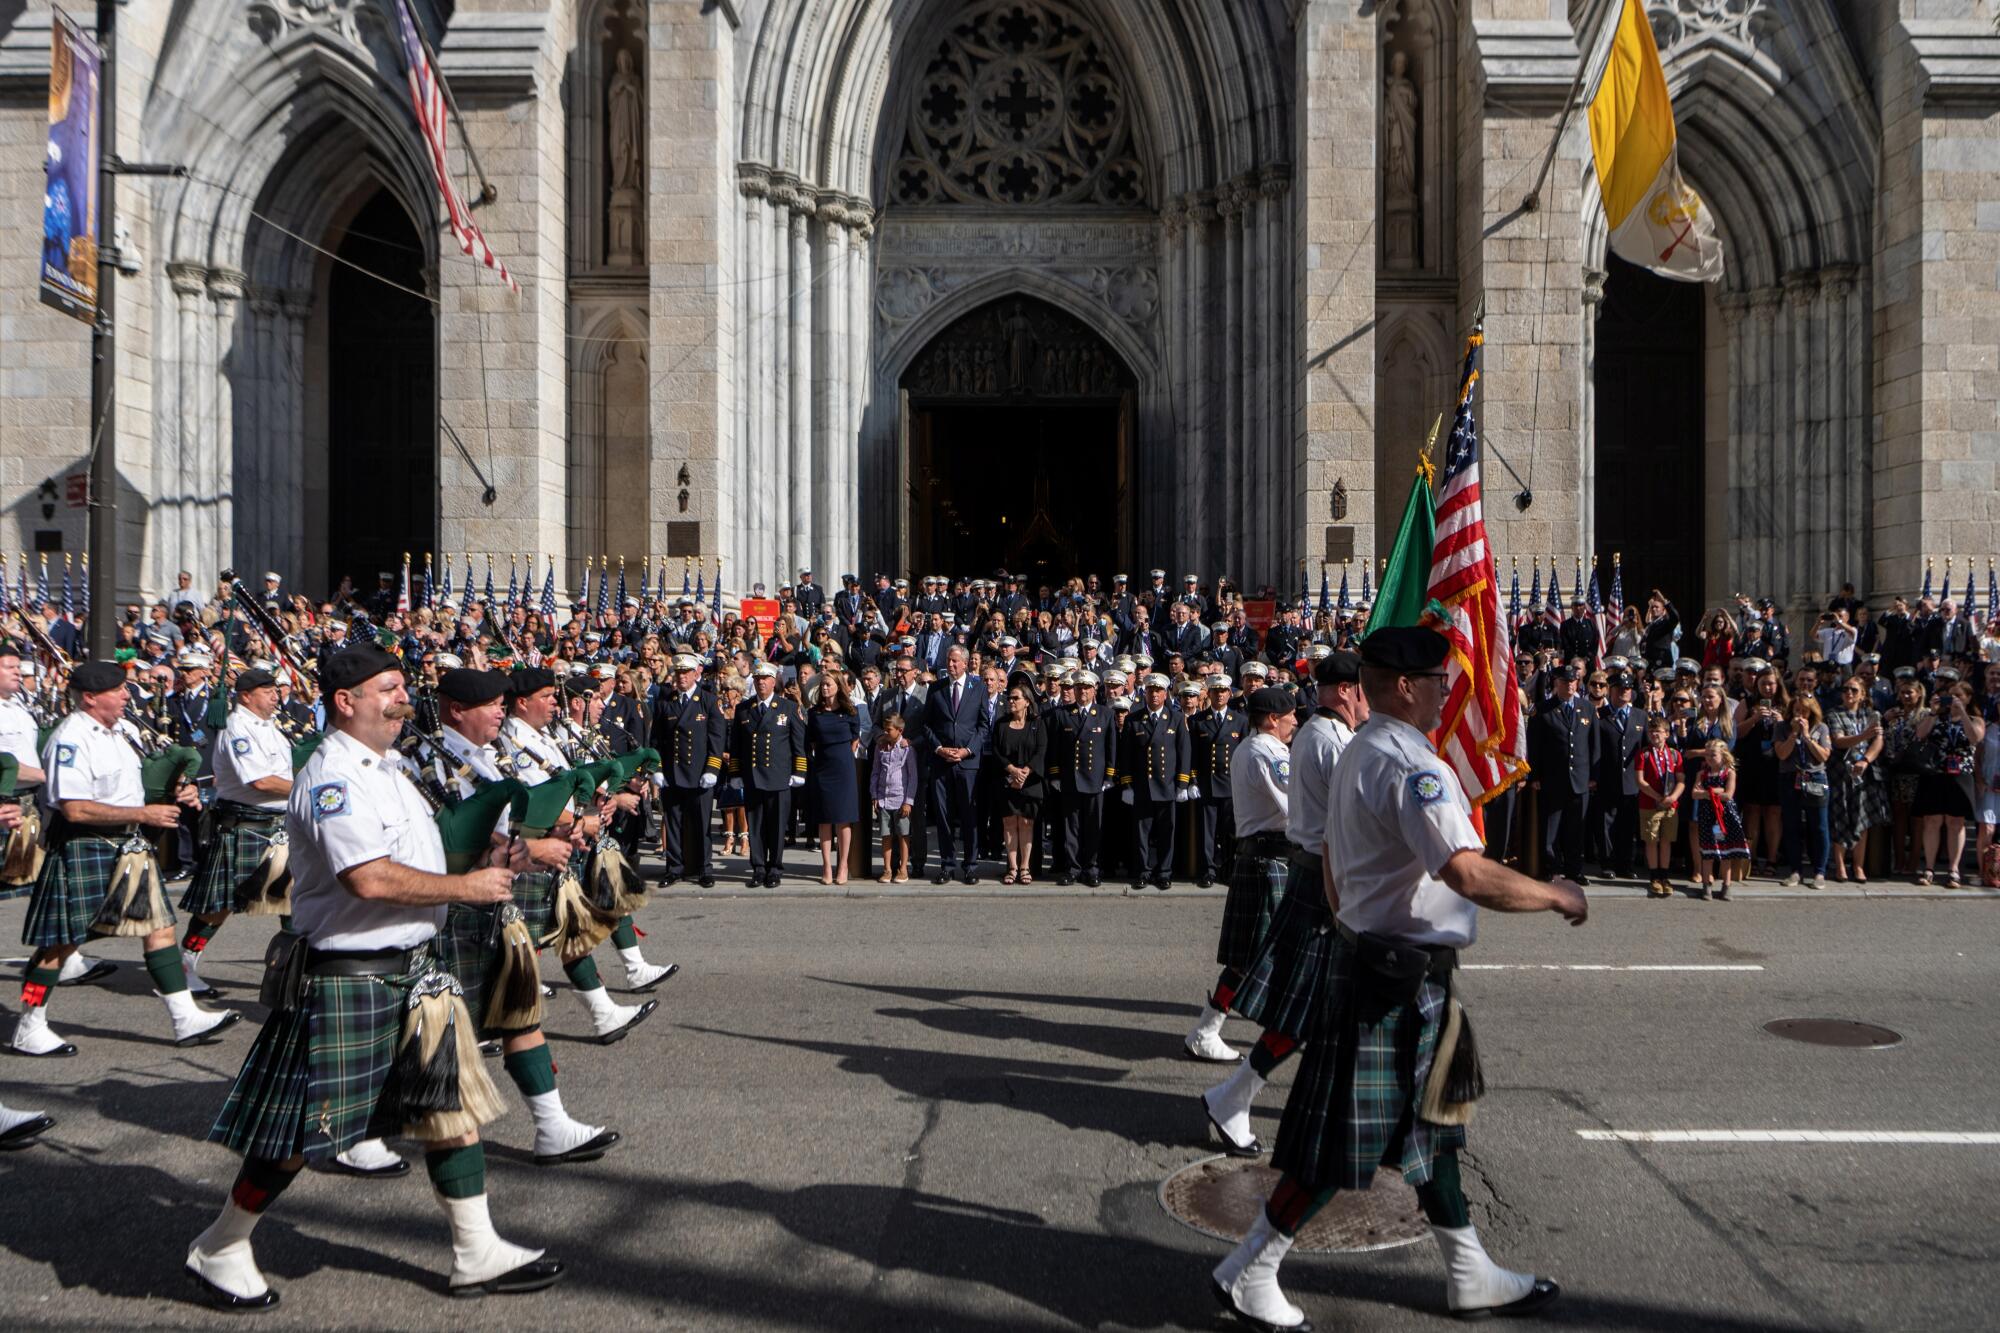 The FDNY Pipes and Drums marches past people at St. Patrick's Cathedral.